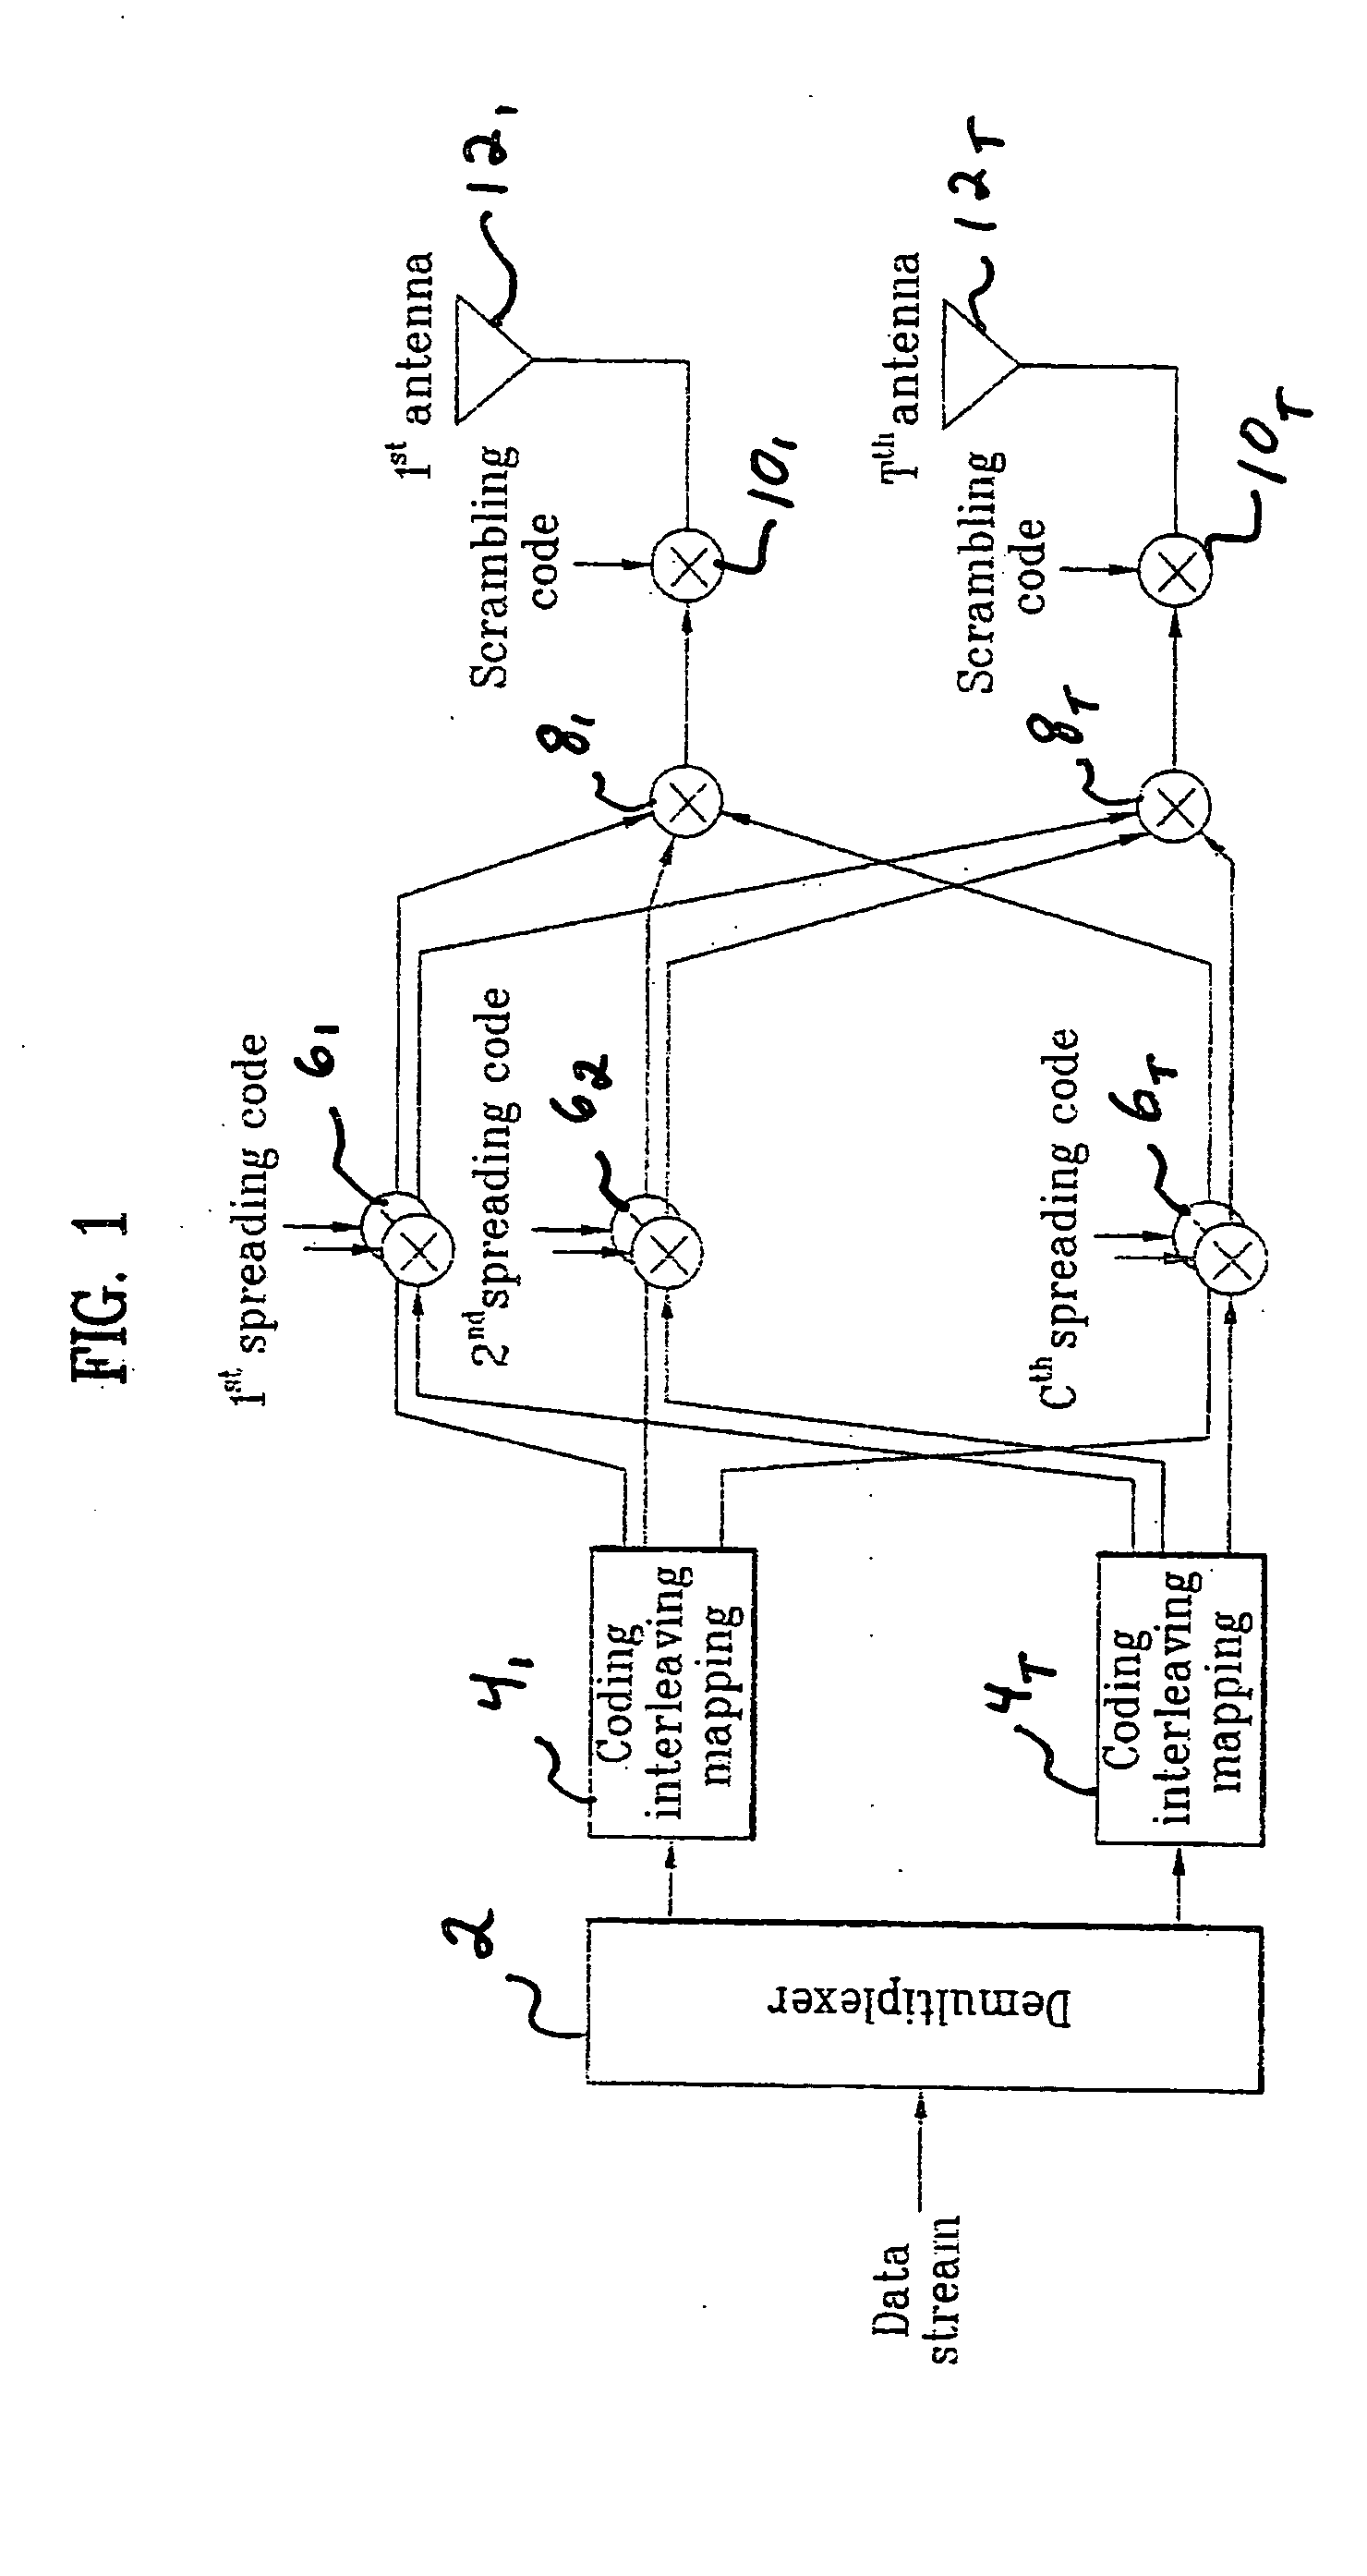 Method of controlling data modulation and coding applied to Multi-Input/Multi-Output system in mobile communications